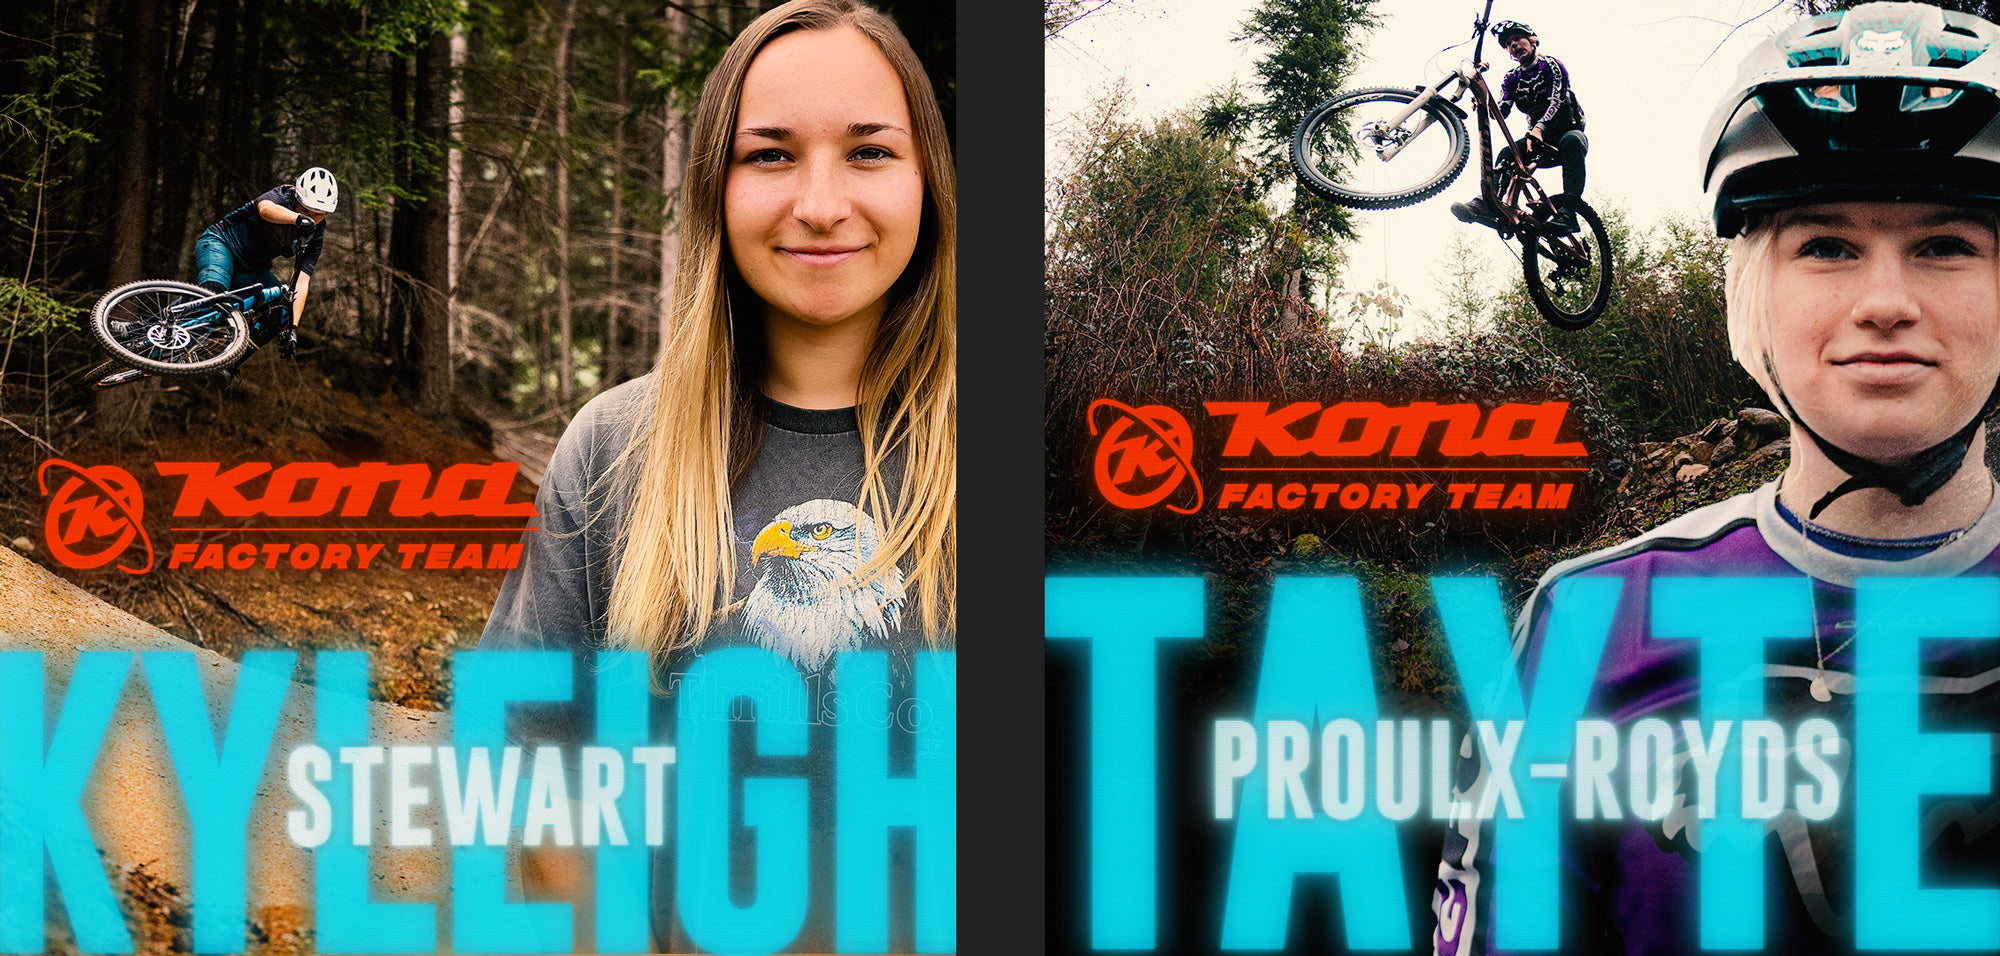 Kona Factory Team Kyleigh Stewart and Tayte Proulx-Royds